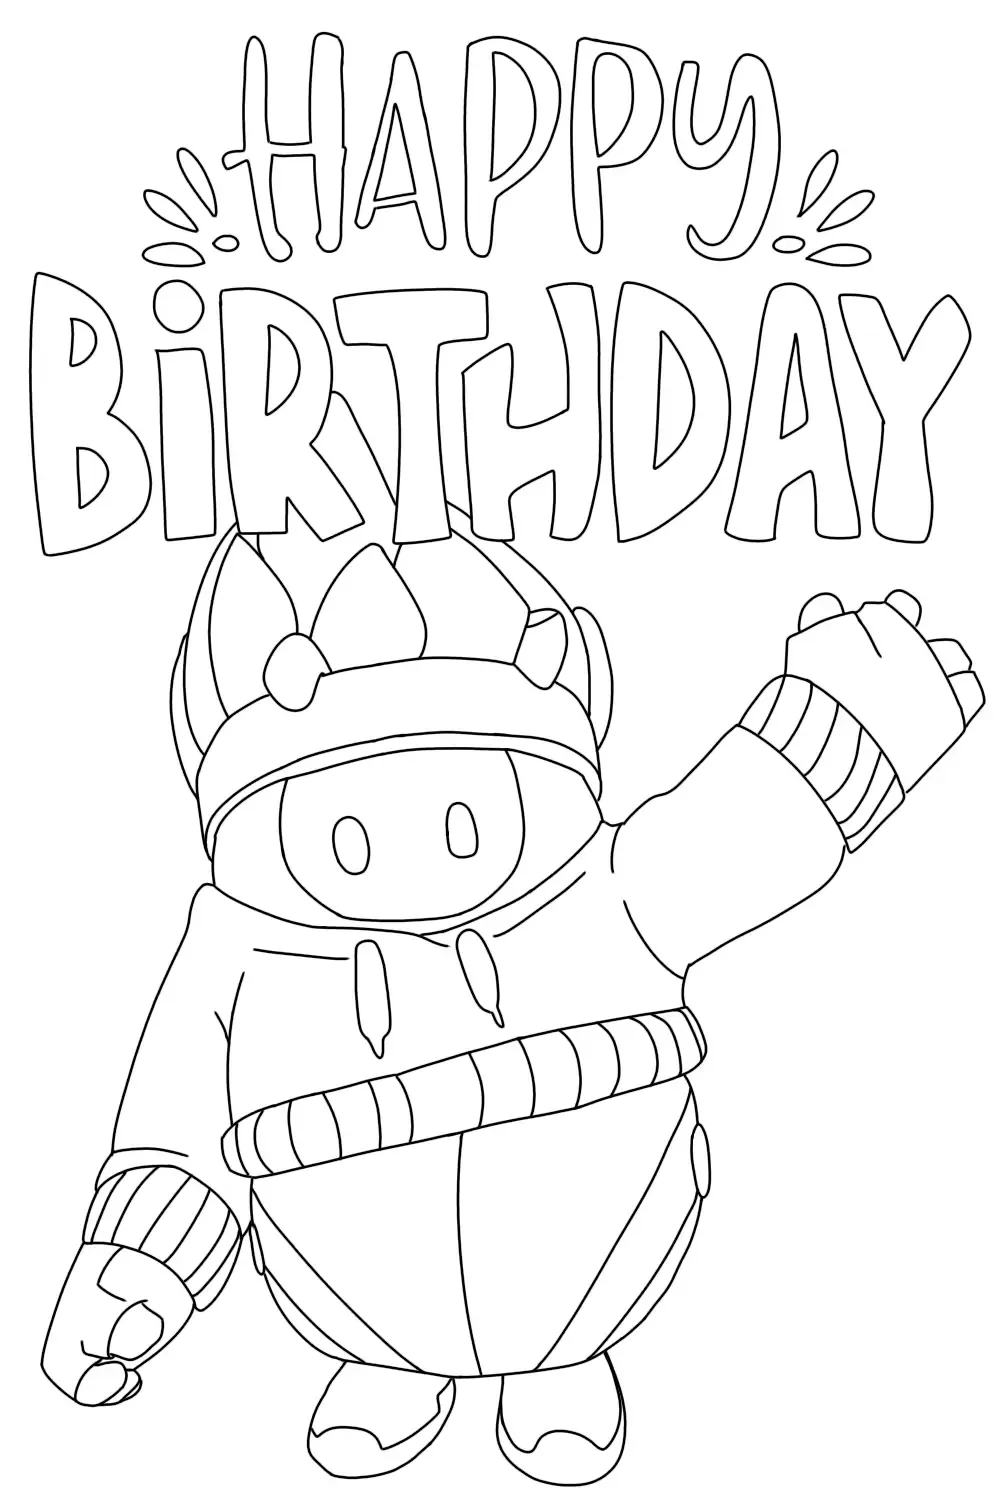 Happy Birthday Fall Guys Coloring Pages